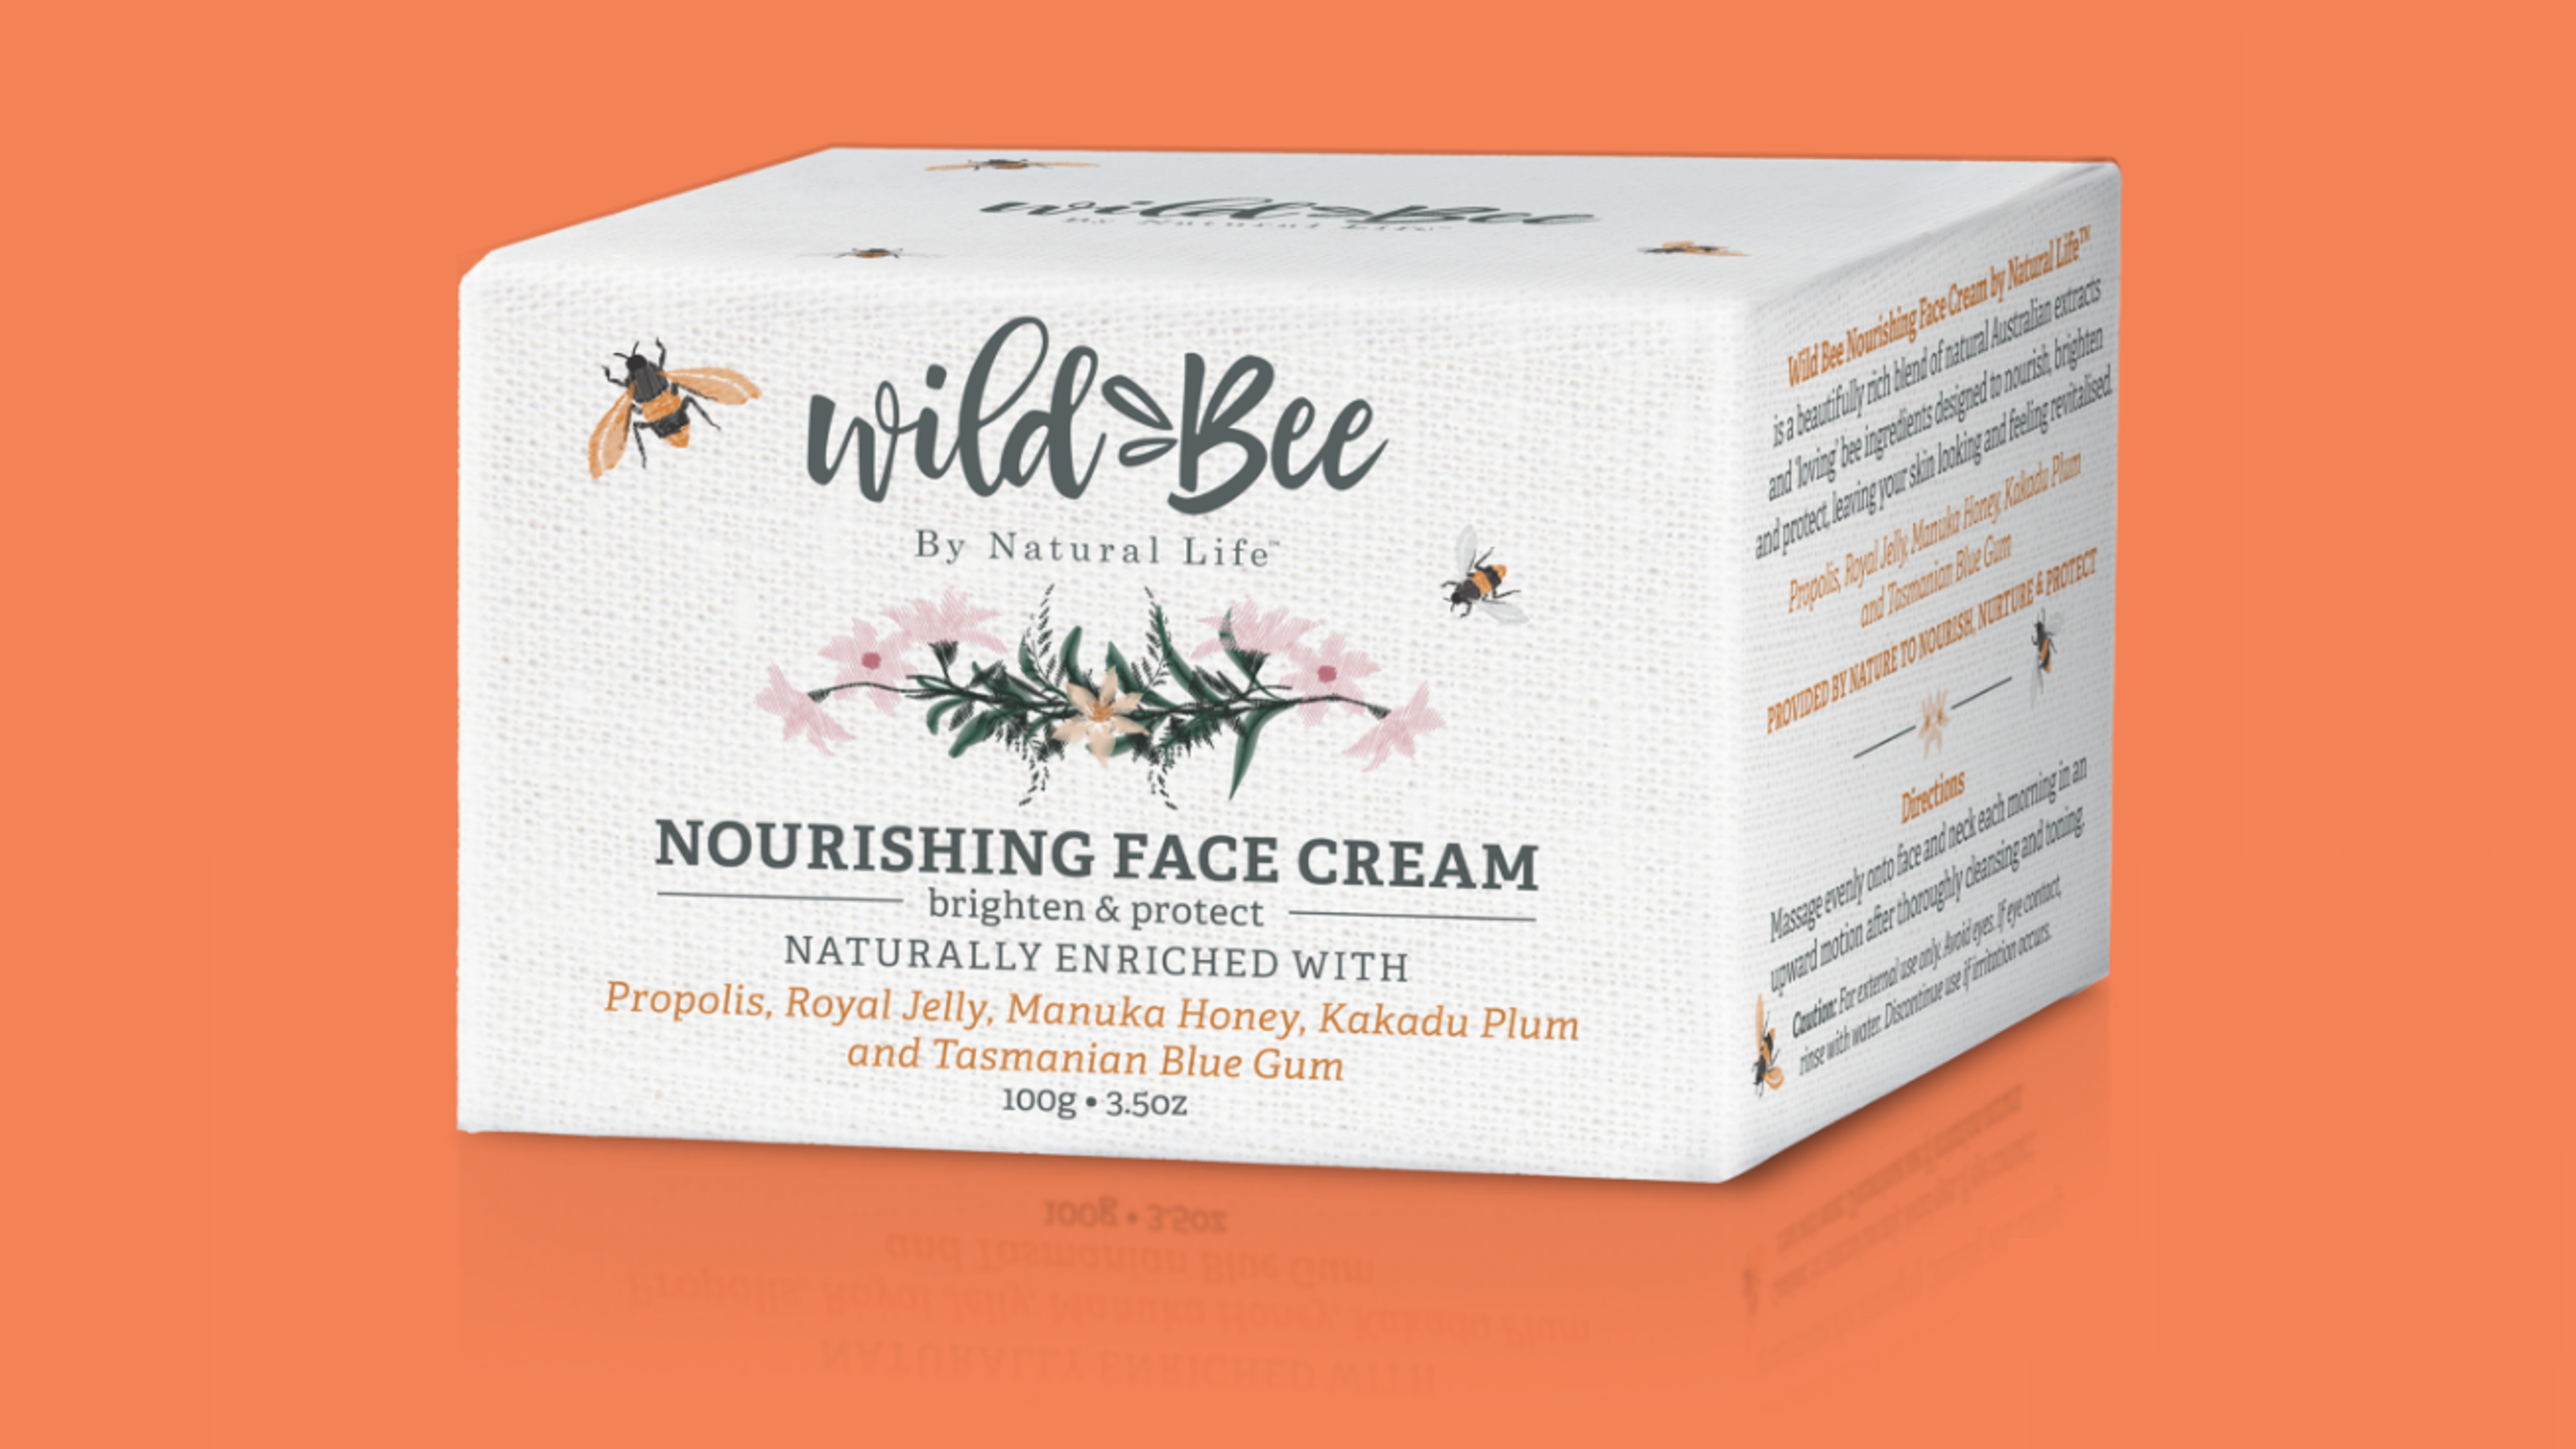 Image of Beautiful Matching Label and Carton for Wild Bee